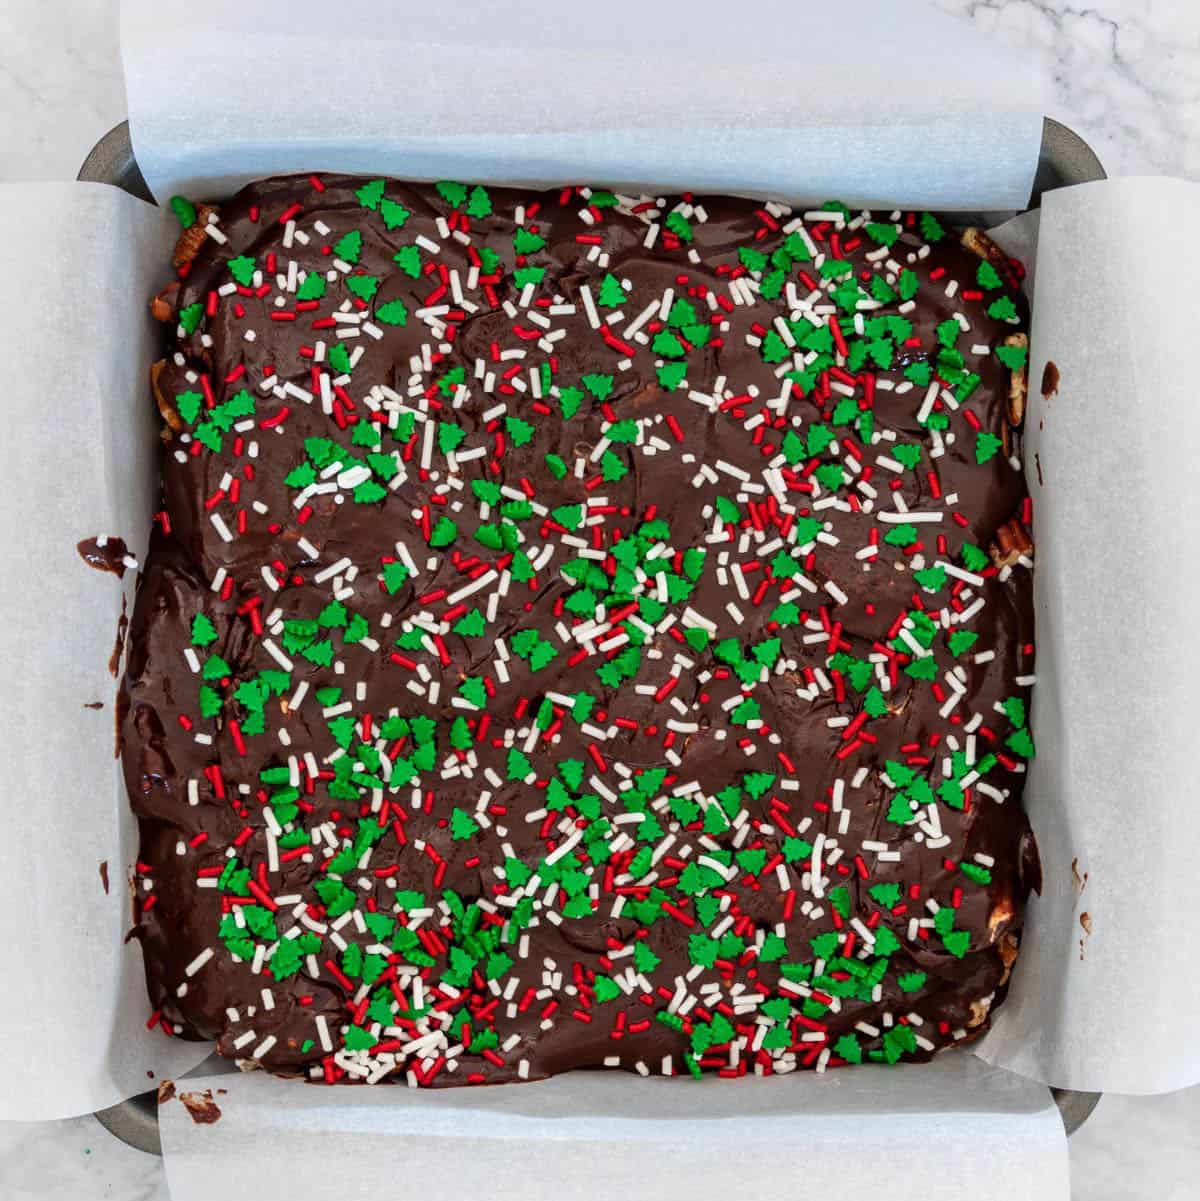 A pan of choco mallow decorated with Christmas sprinkles.